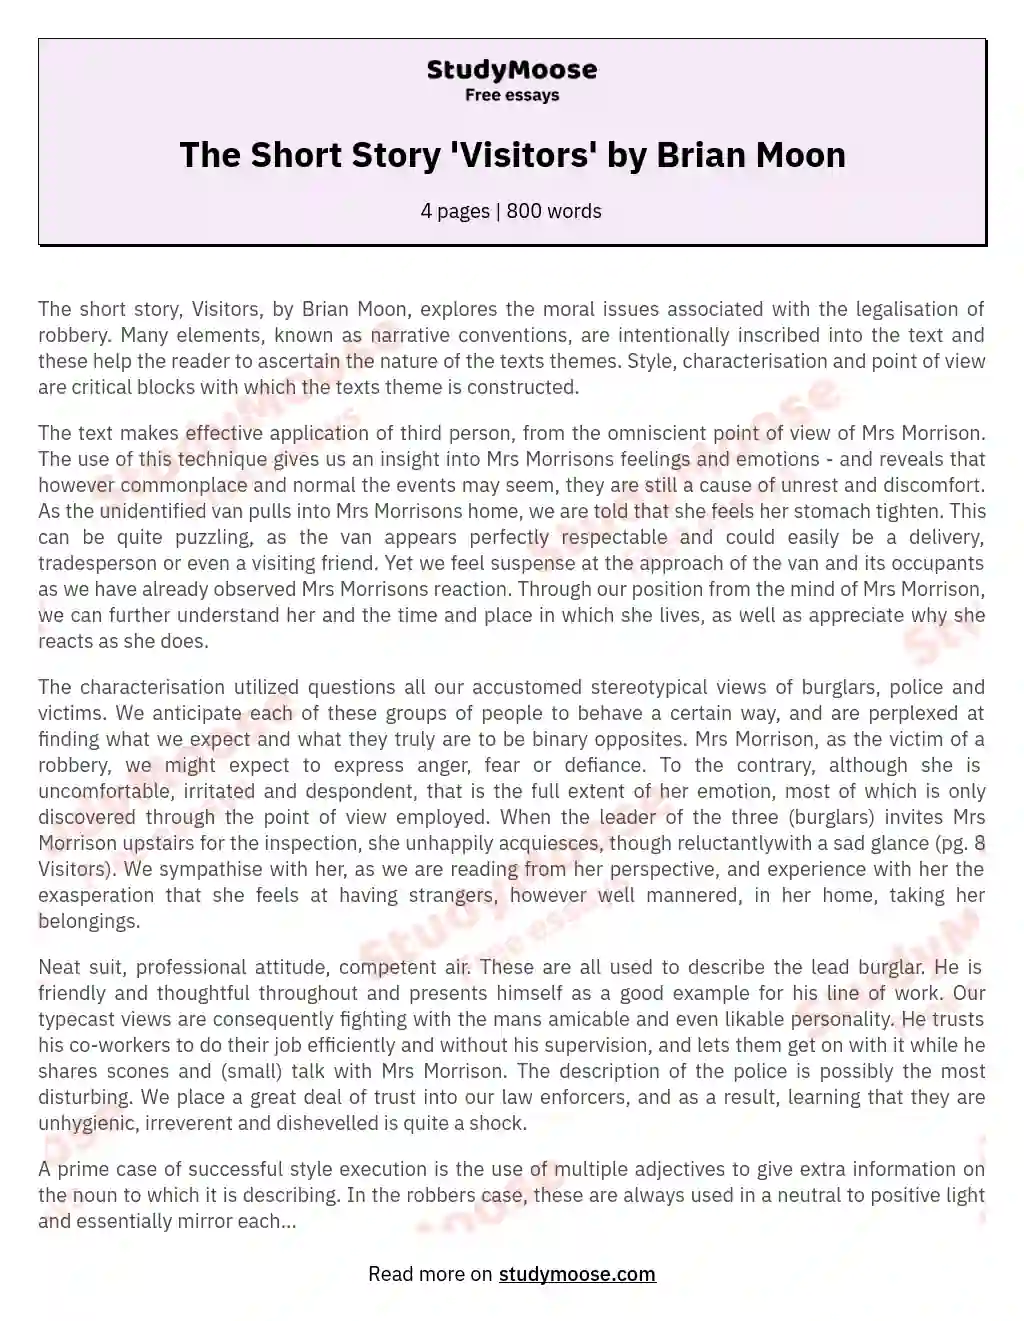 The Short Story 'Visitors' by Brian Moon essay